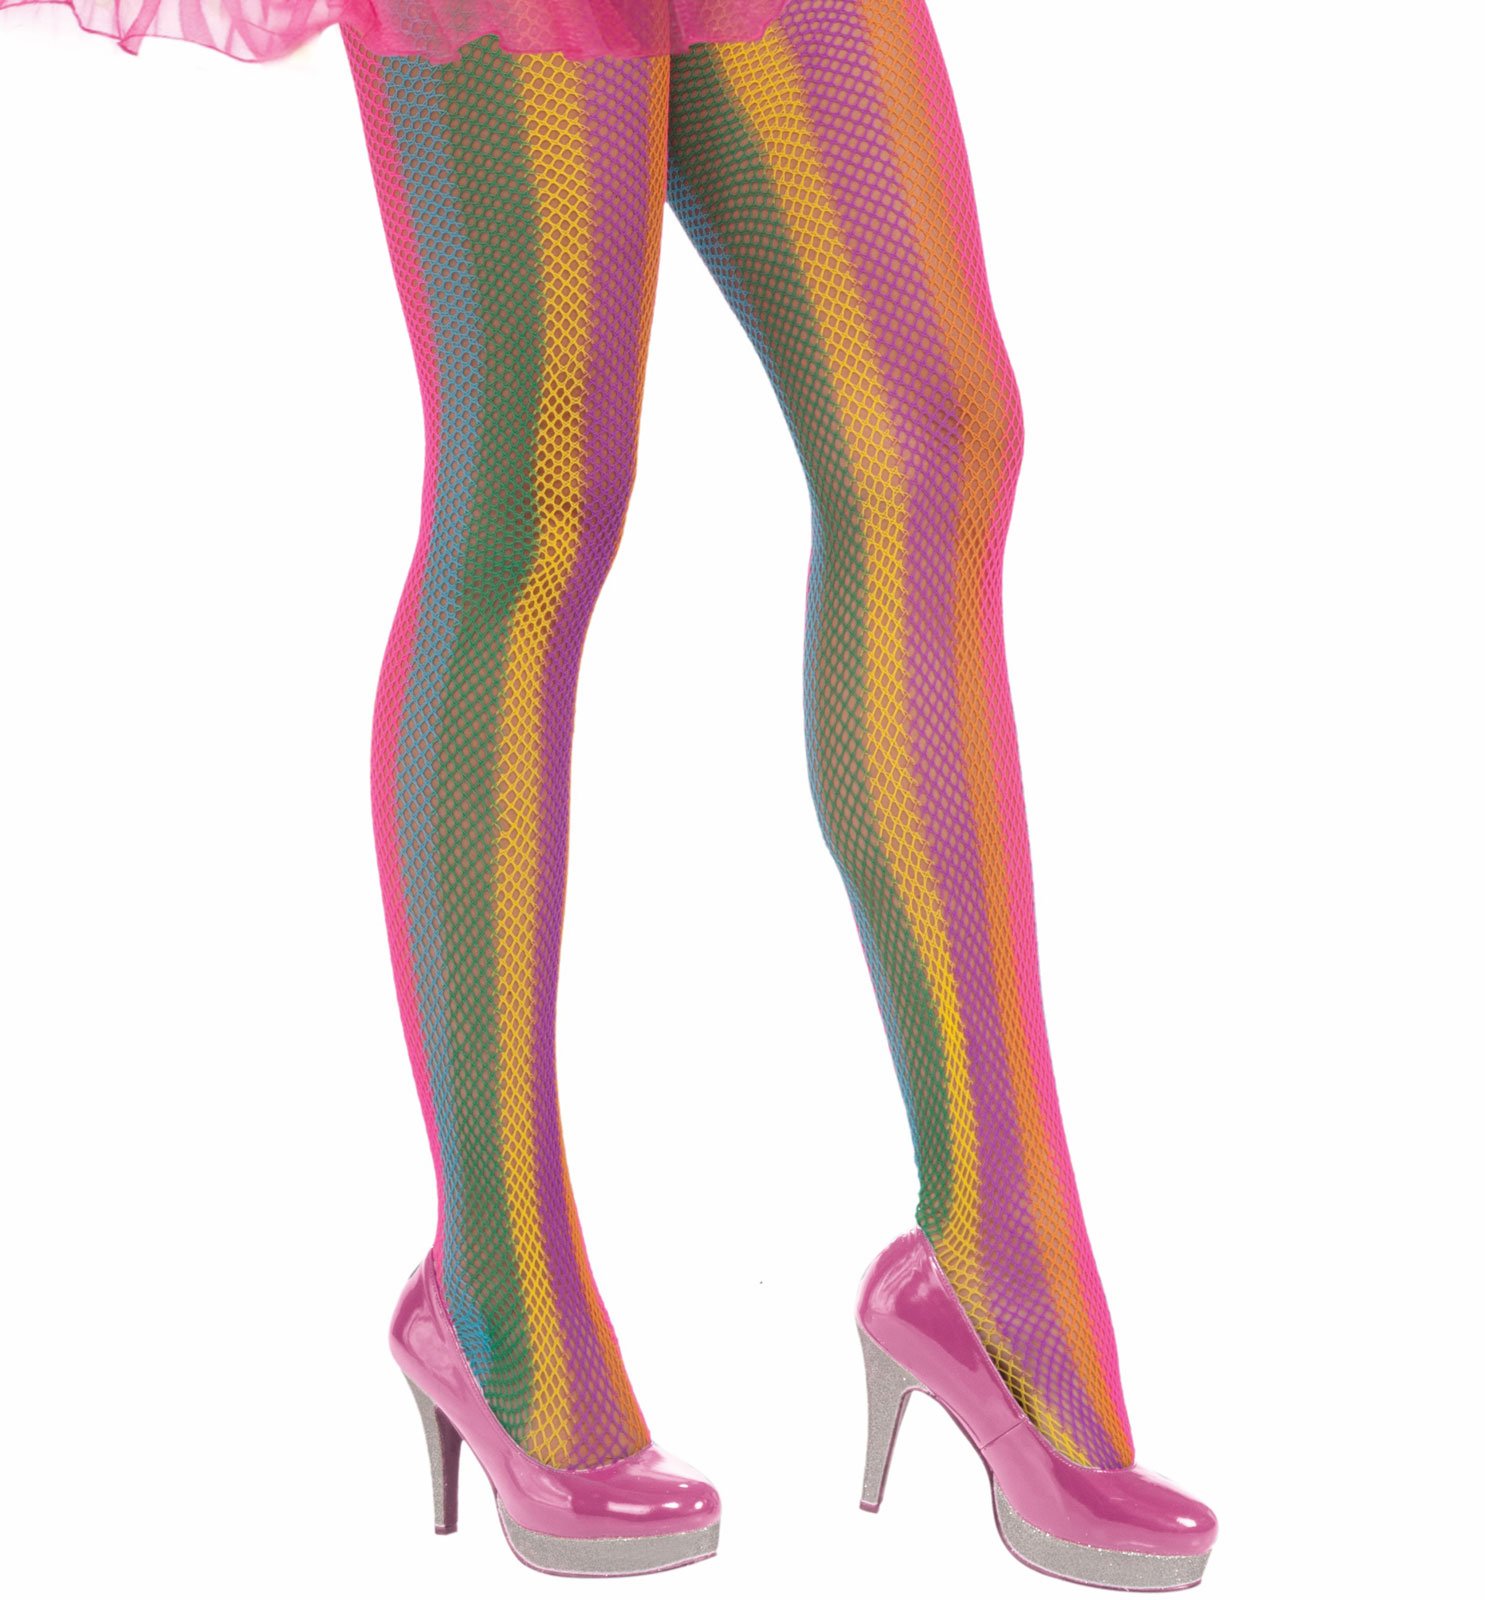 Circus Sweetie Rainbow Striped Fishnet Panty Hose